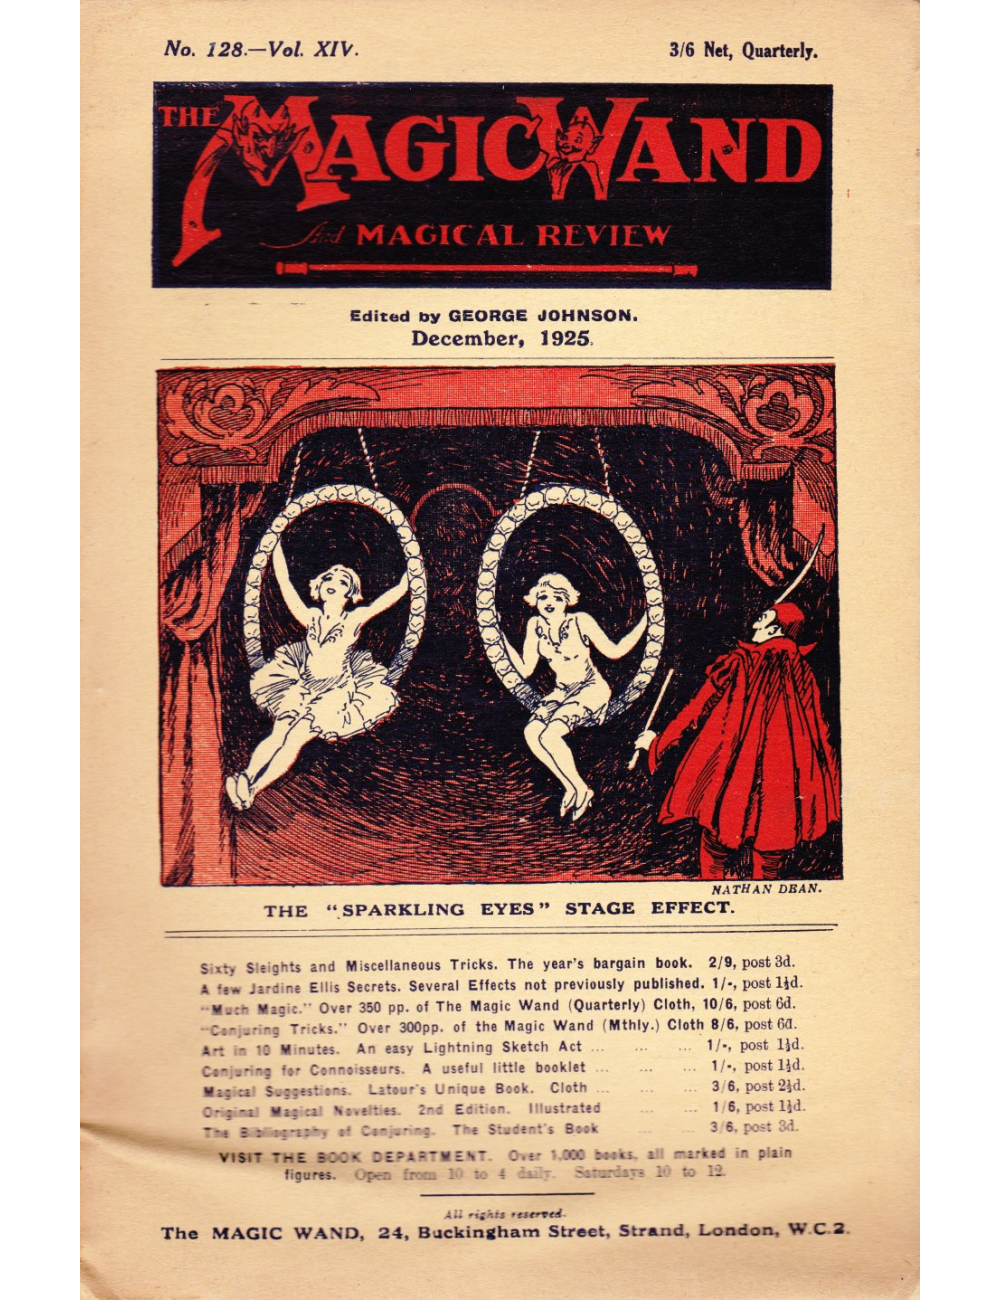 THE MAGIC WAND AND MAGICAL REVIEW December, 1925